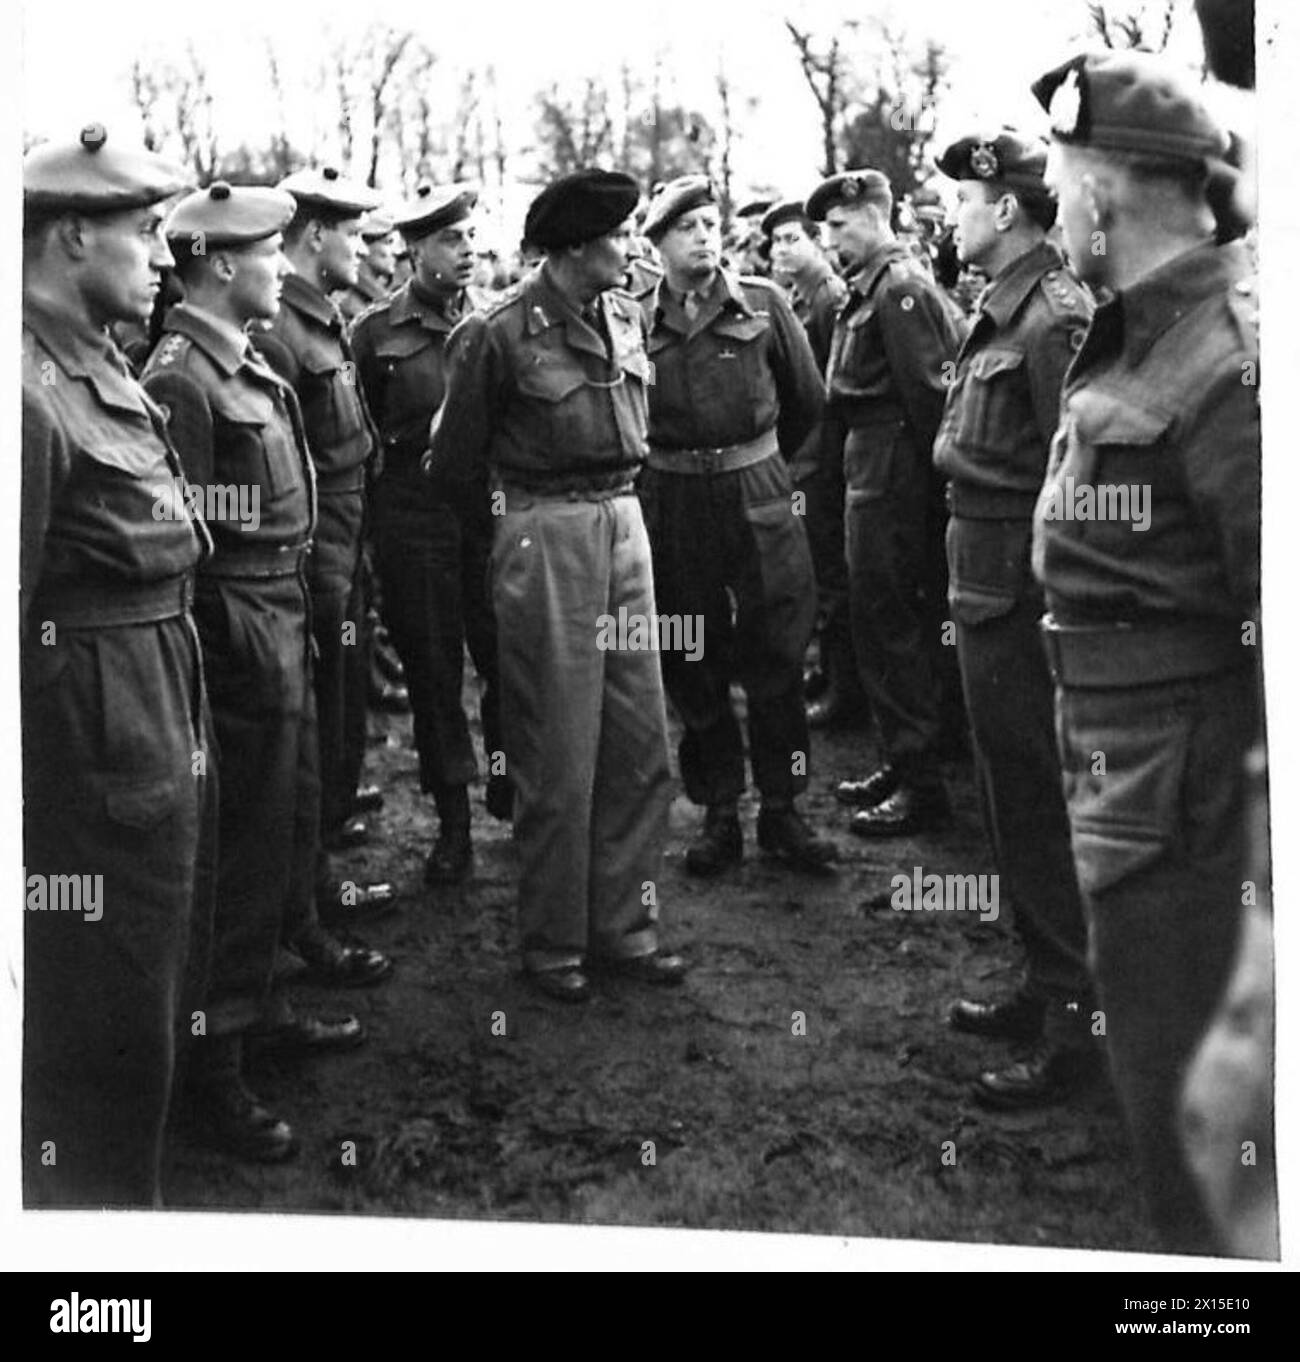 GENERAL MONTGOMERY'S TOUR OF ARMY UNITS - General Montgomery (now Field Marshal) speaking to officers of the 6th Battalion Kings Own Scottish Borders at Langholm. He is accompanied by Lieutenant Colonel J.G. Shillington.Picture taken in February 1944 during Field Marshal (then General) Montgomery's tour of the units who were massing in Britain, ready for D-Day. He travelled over 3,000 miles during this tour, and spoke to thousands of his men Stock Photo